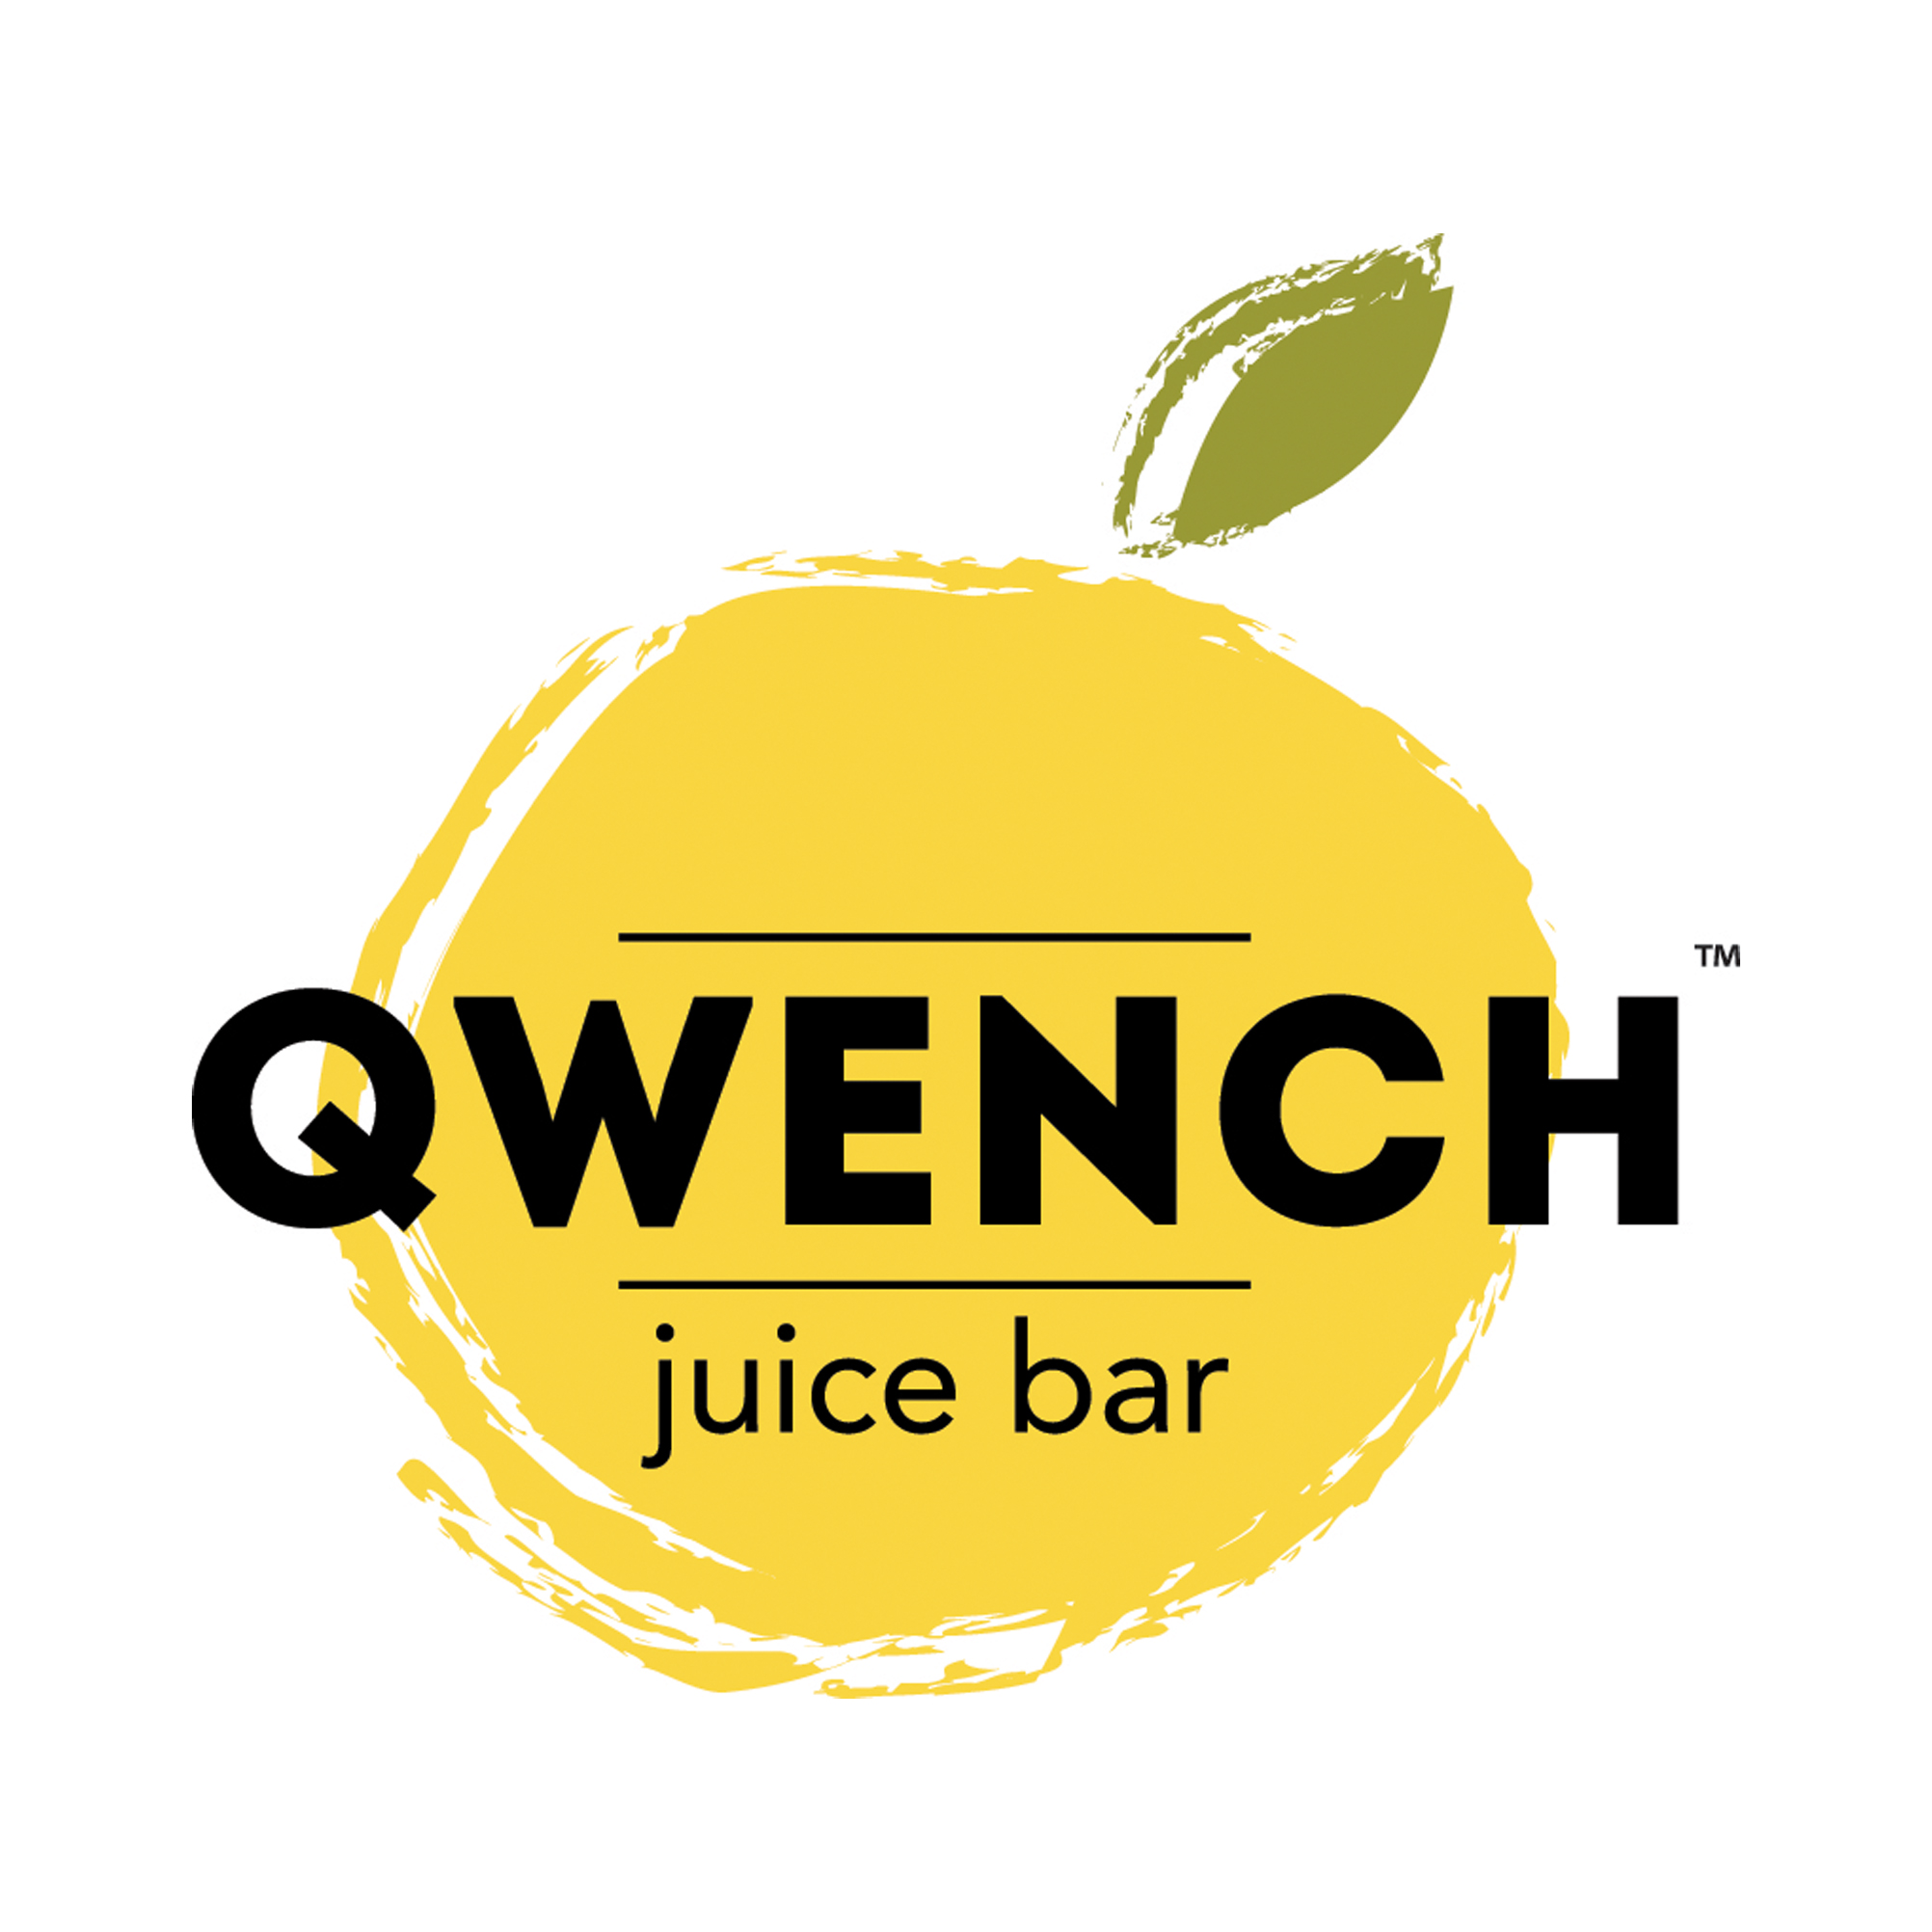 Qwench